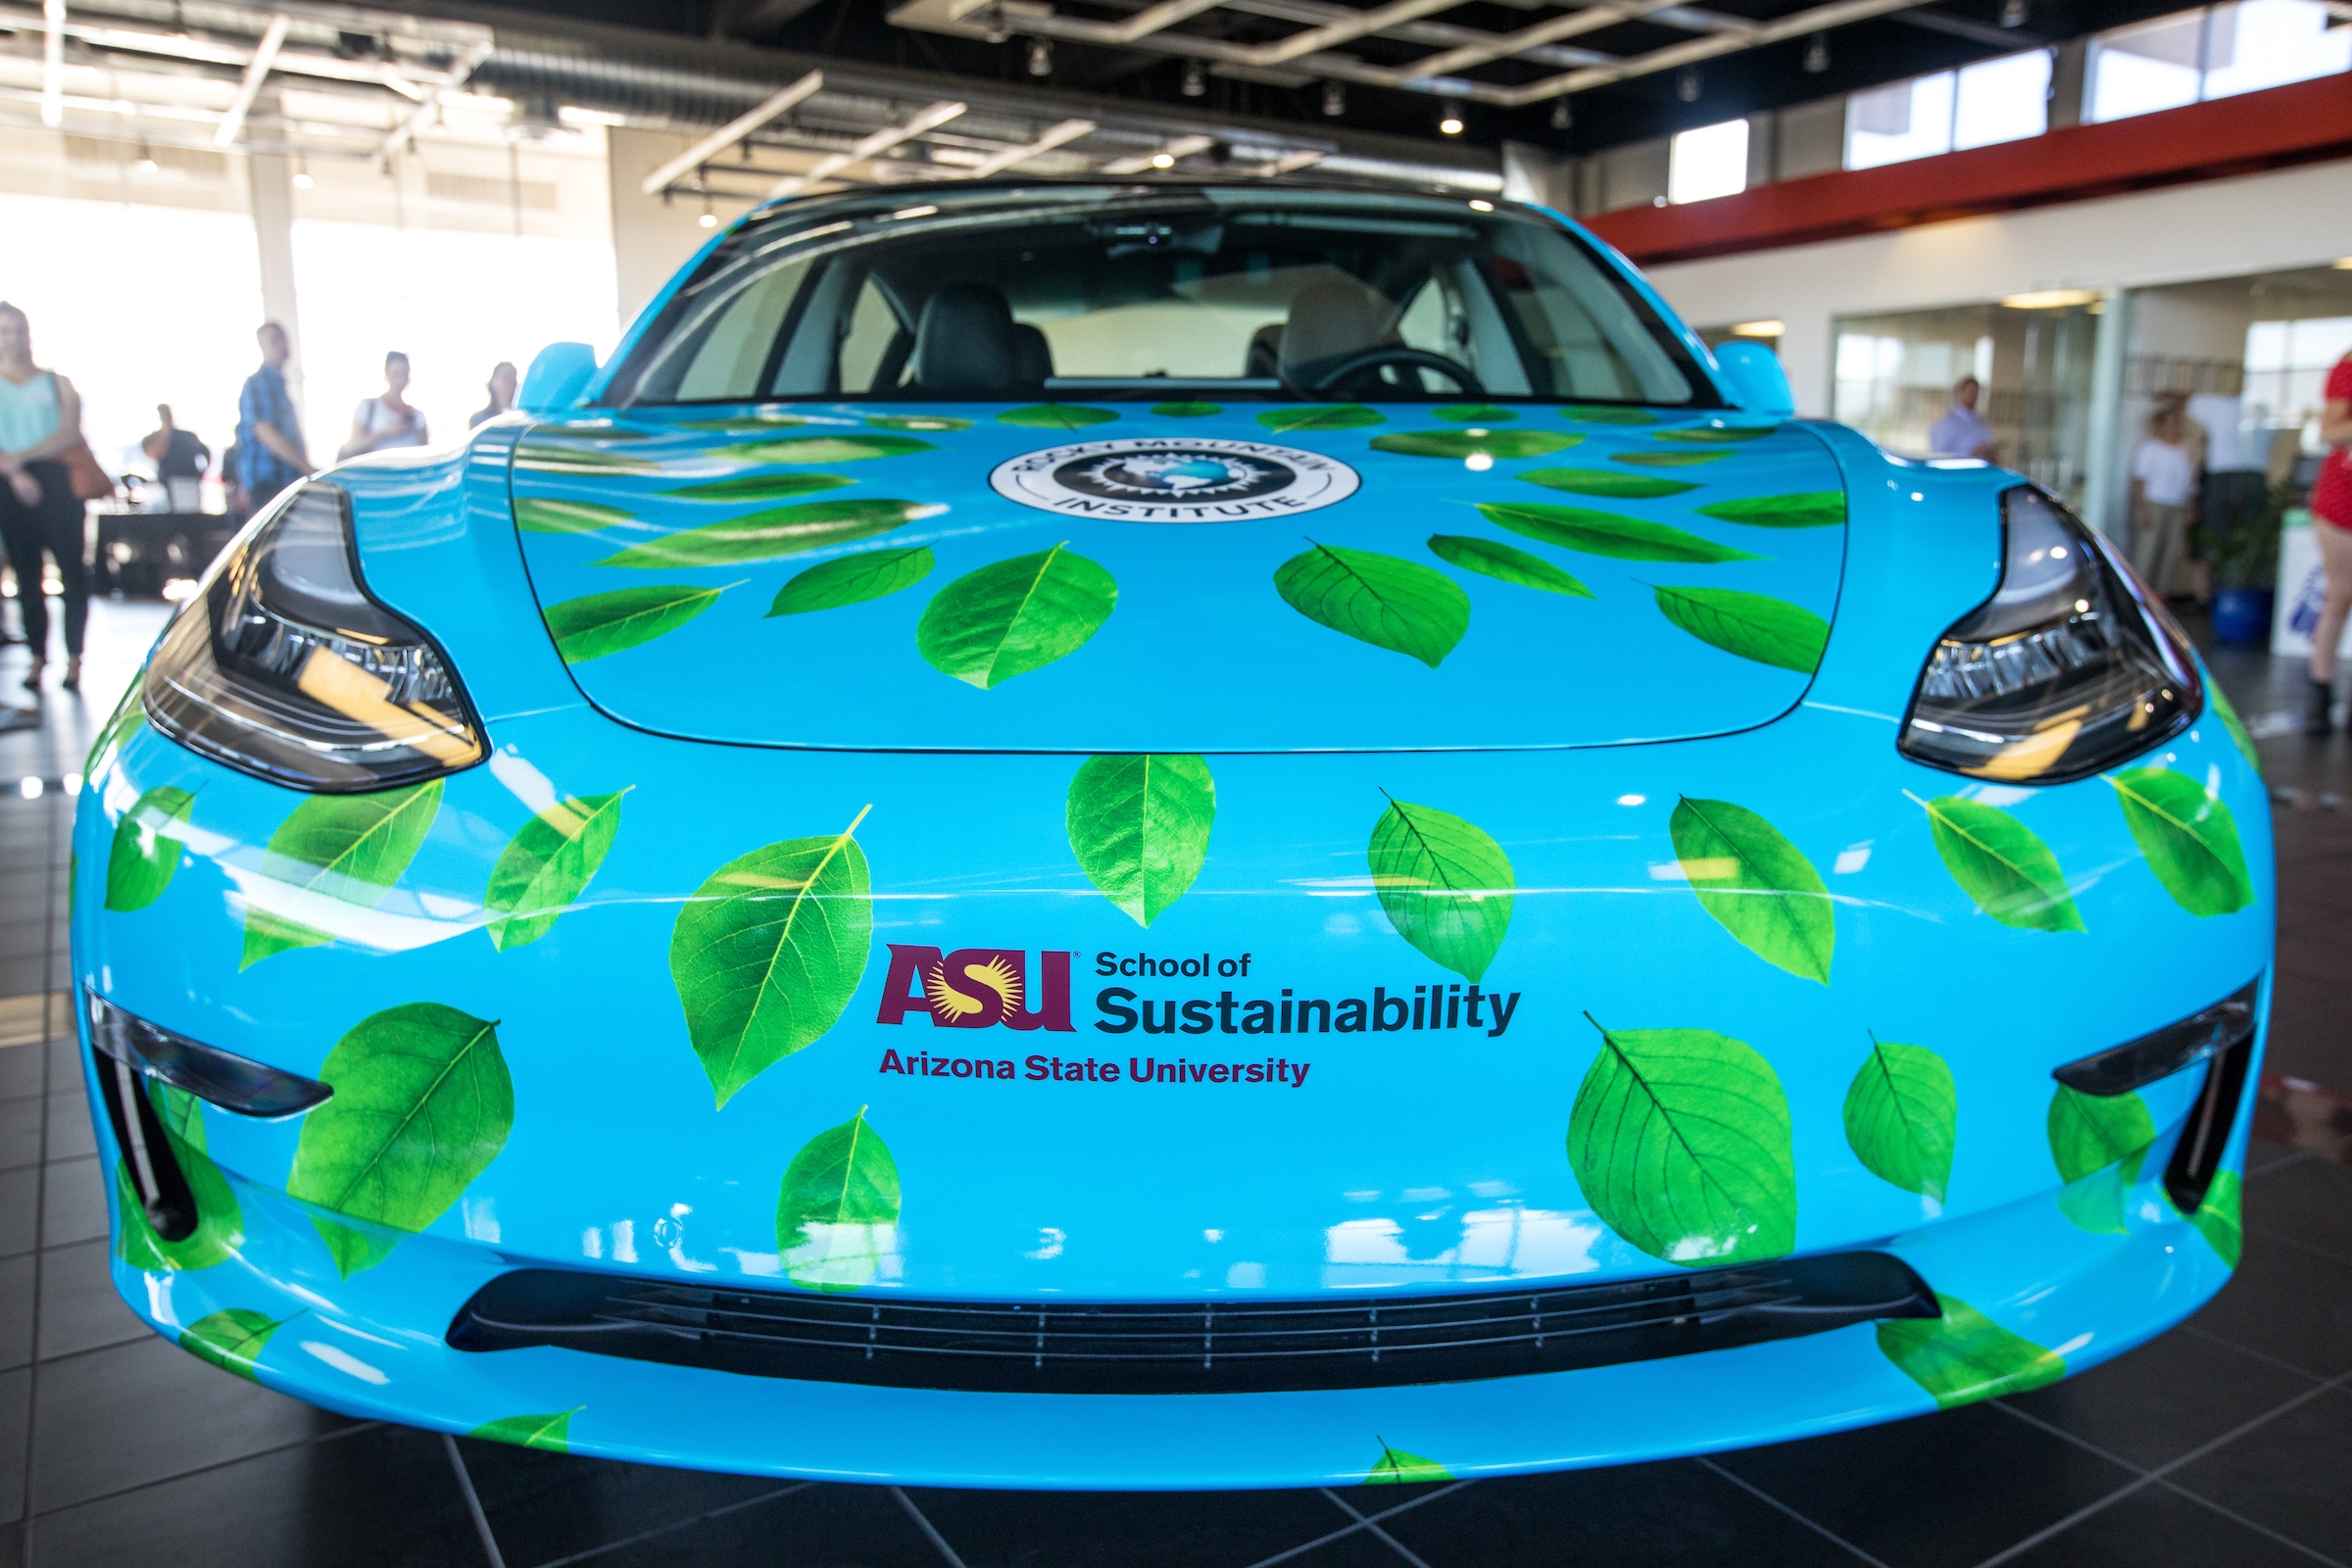 blue-colored wrap with green leaves and the ASU School of Sustainability logo on a Tesla car